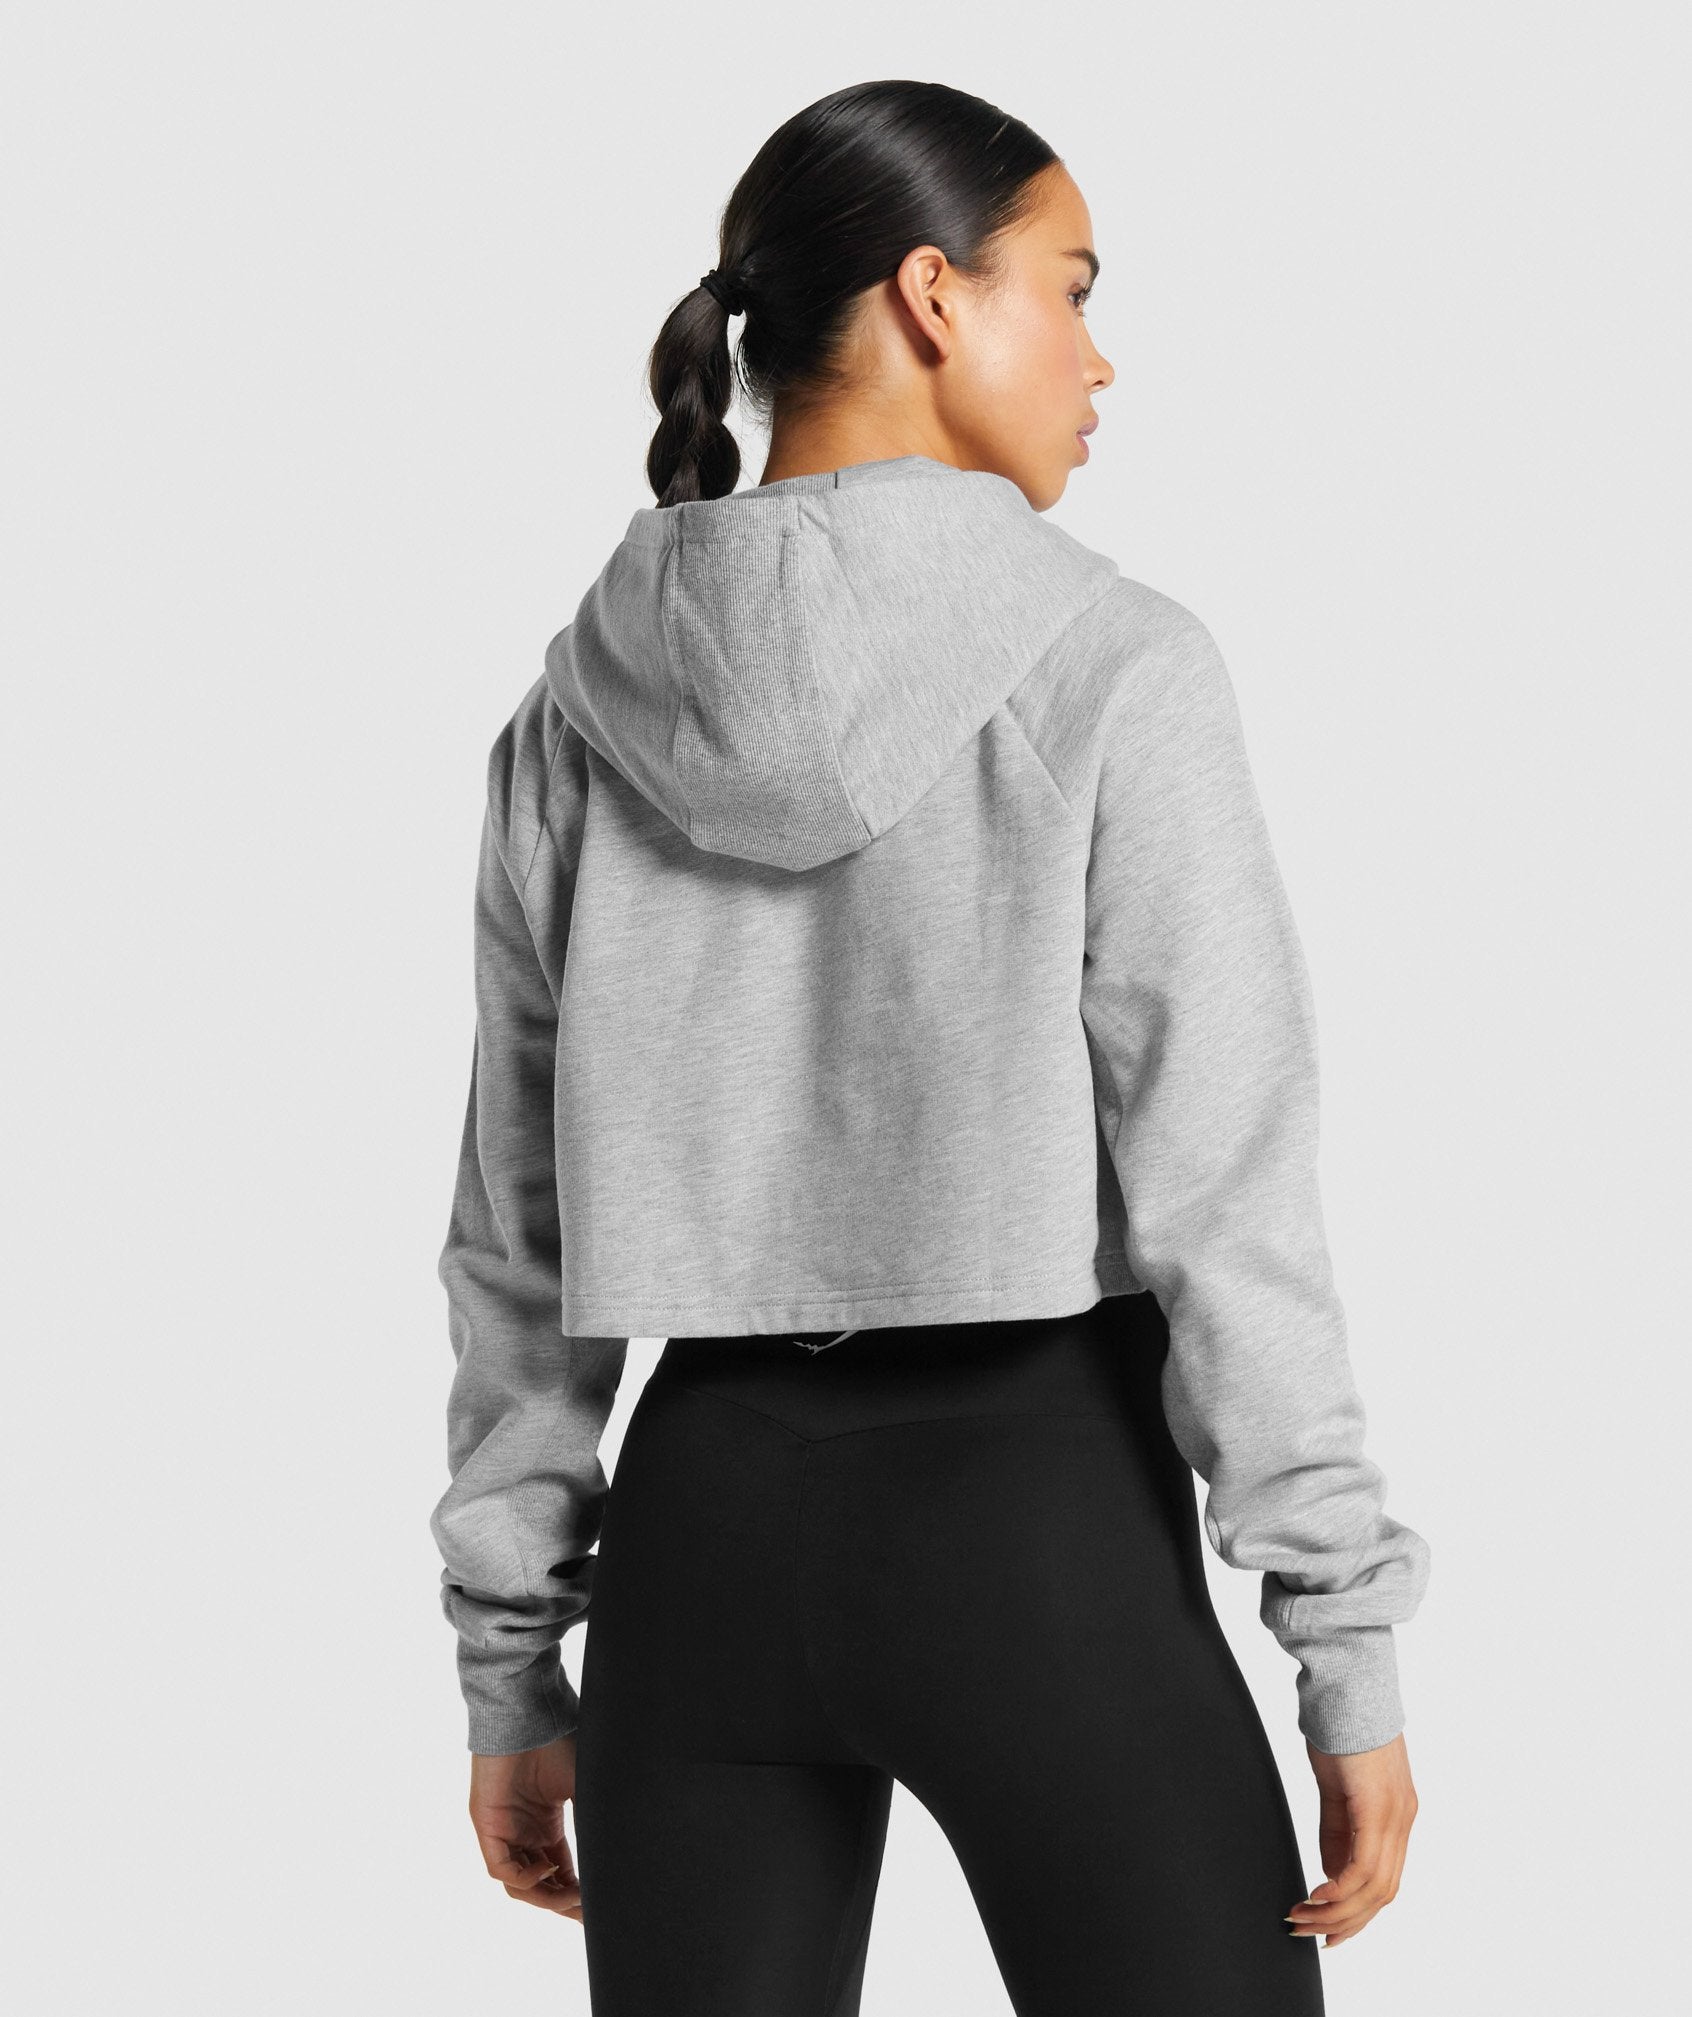 Training Cropped Hoodie product image 2